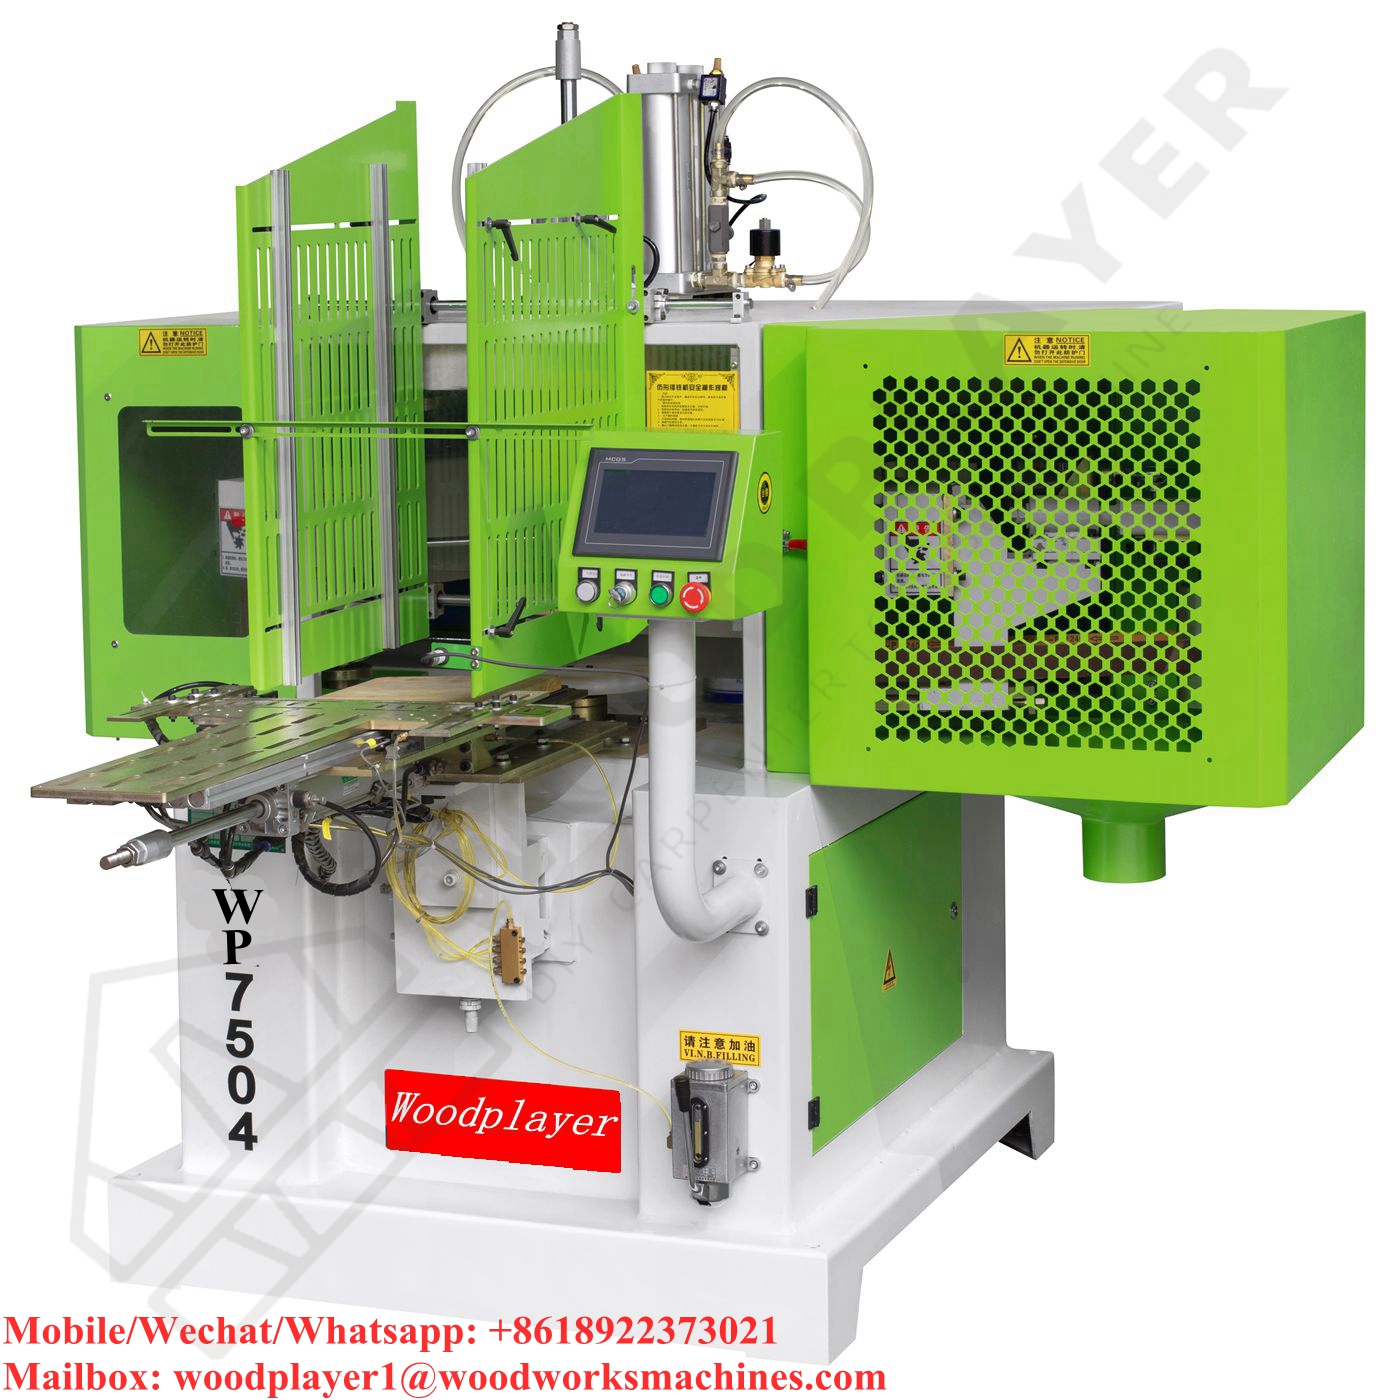 WP7504-SA Auto Double Shafts Copy Shaper (Channeling Sand) Profiled Milling Woodworking Machine